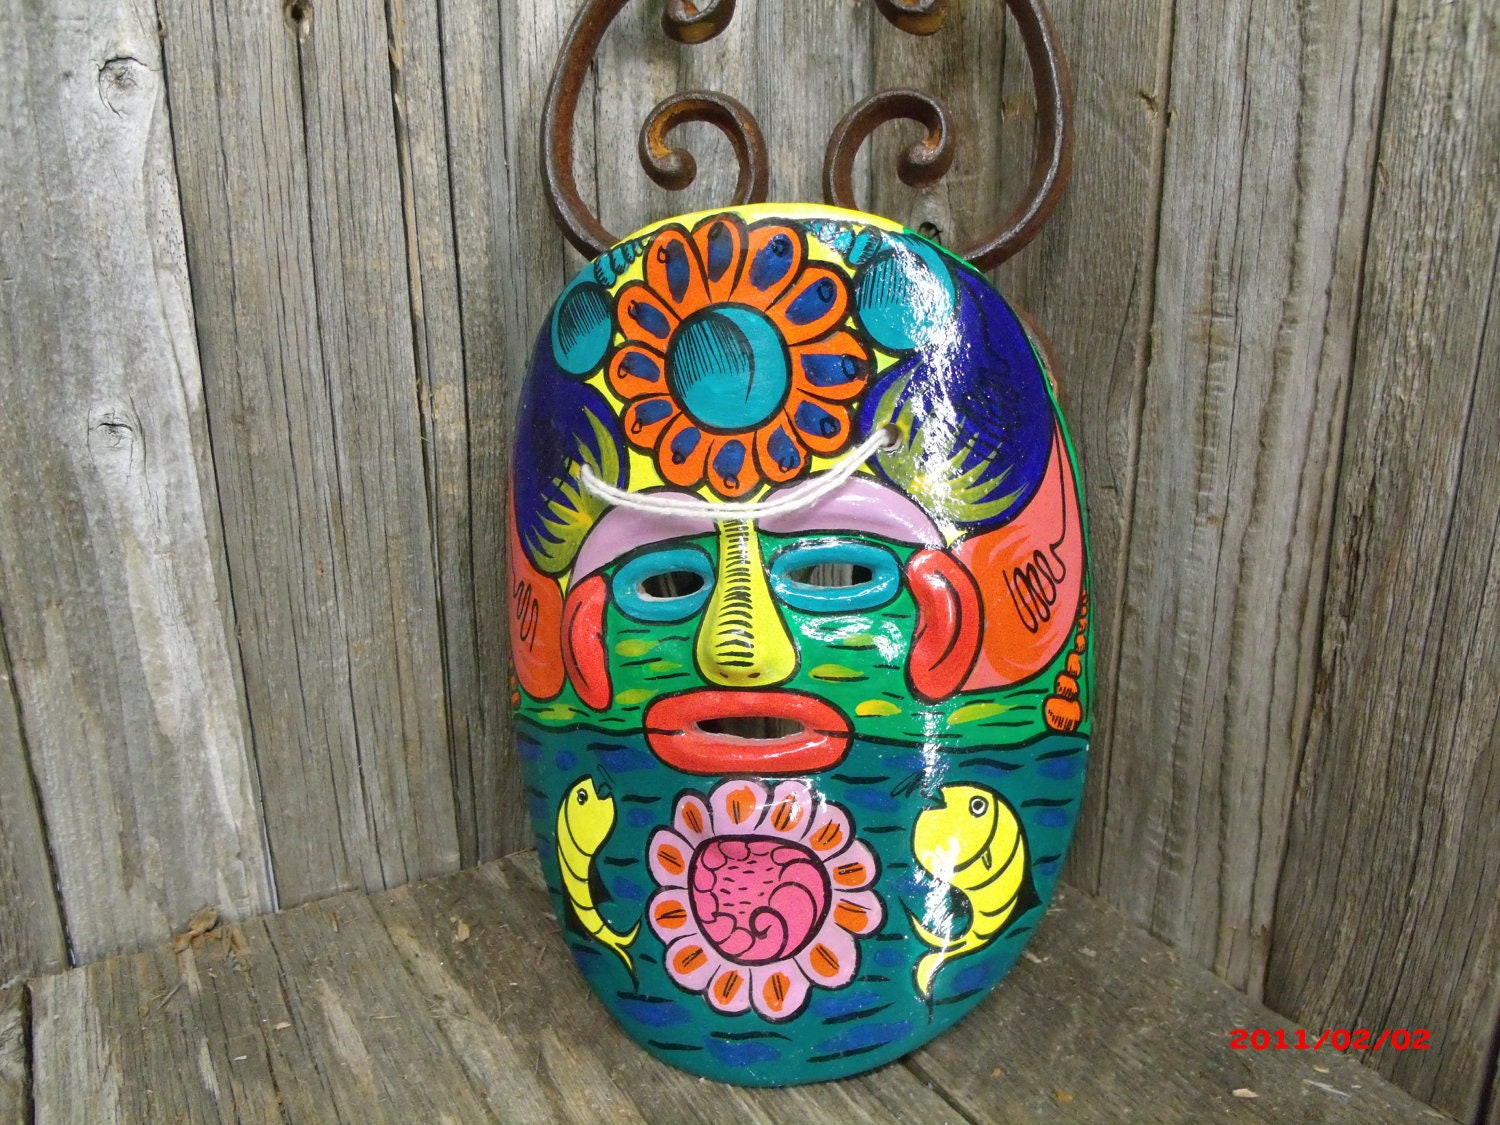 colorful mexican masks